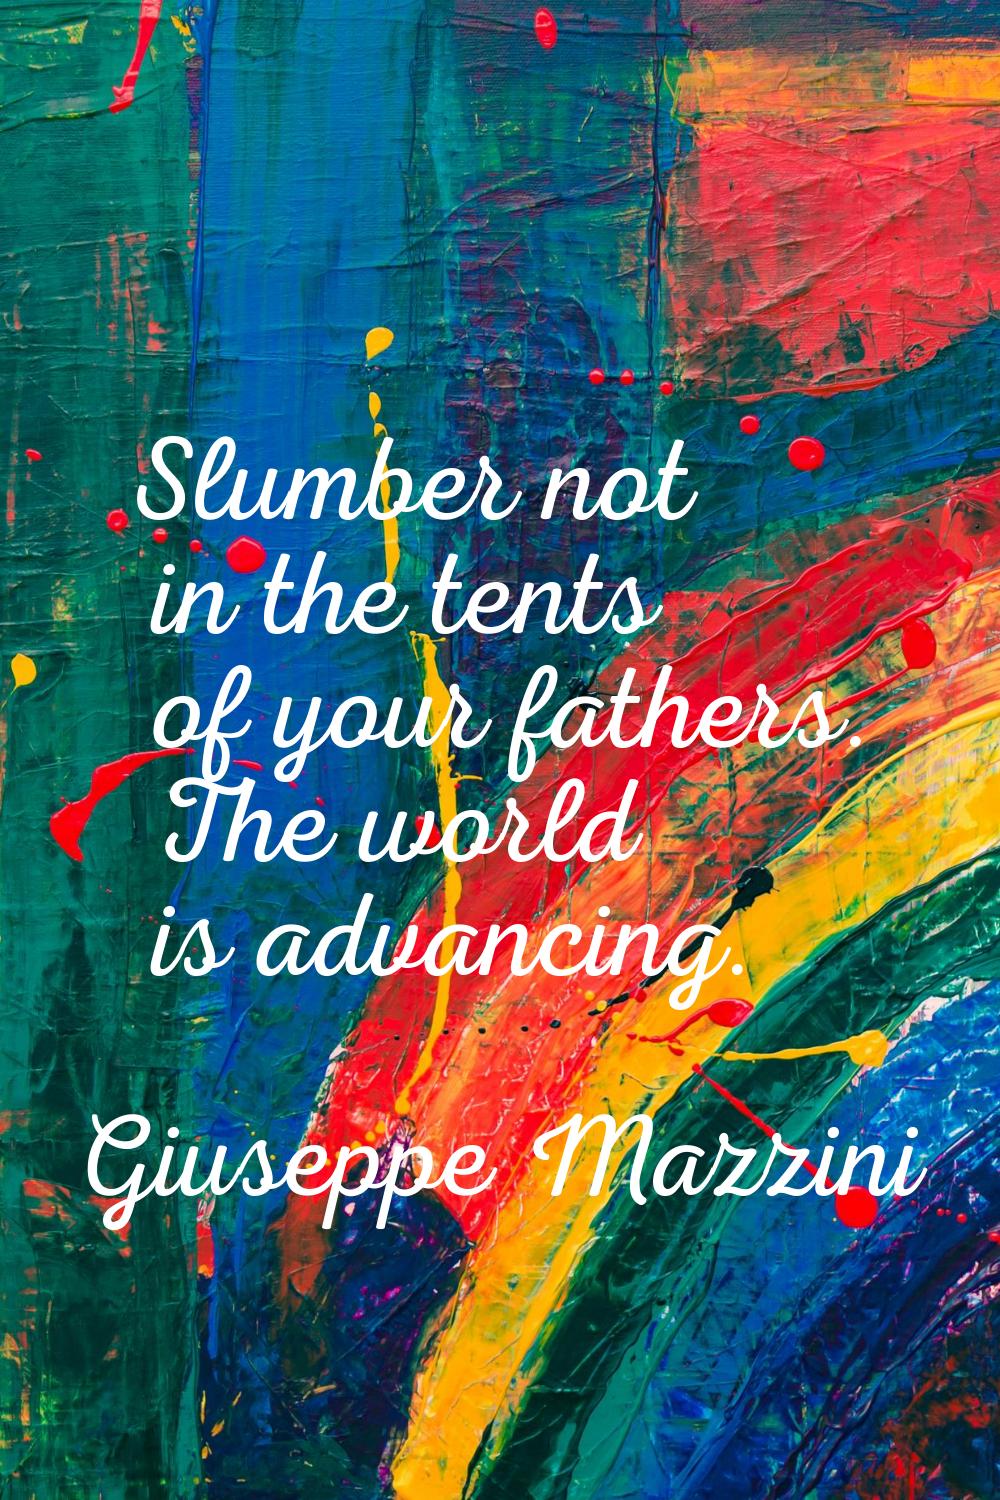 Slumber not in the tents of your fathers. The world is advancing.